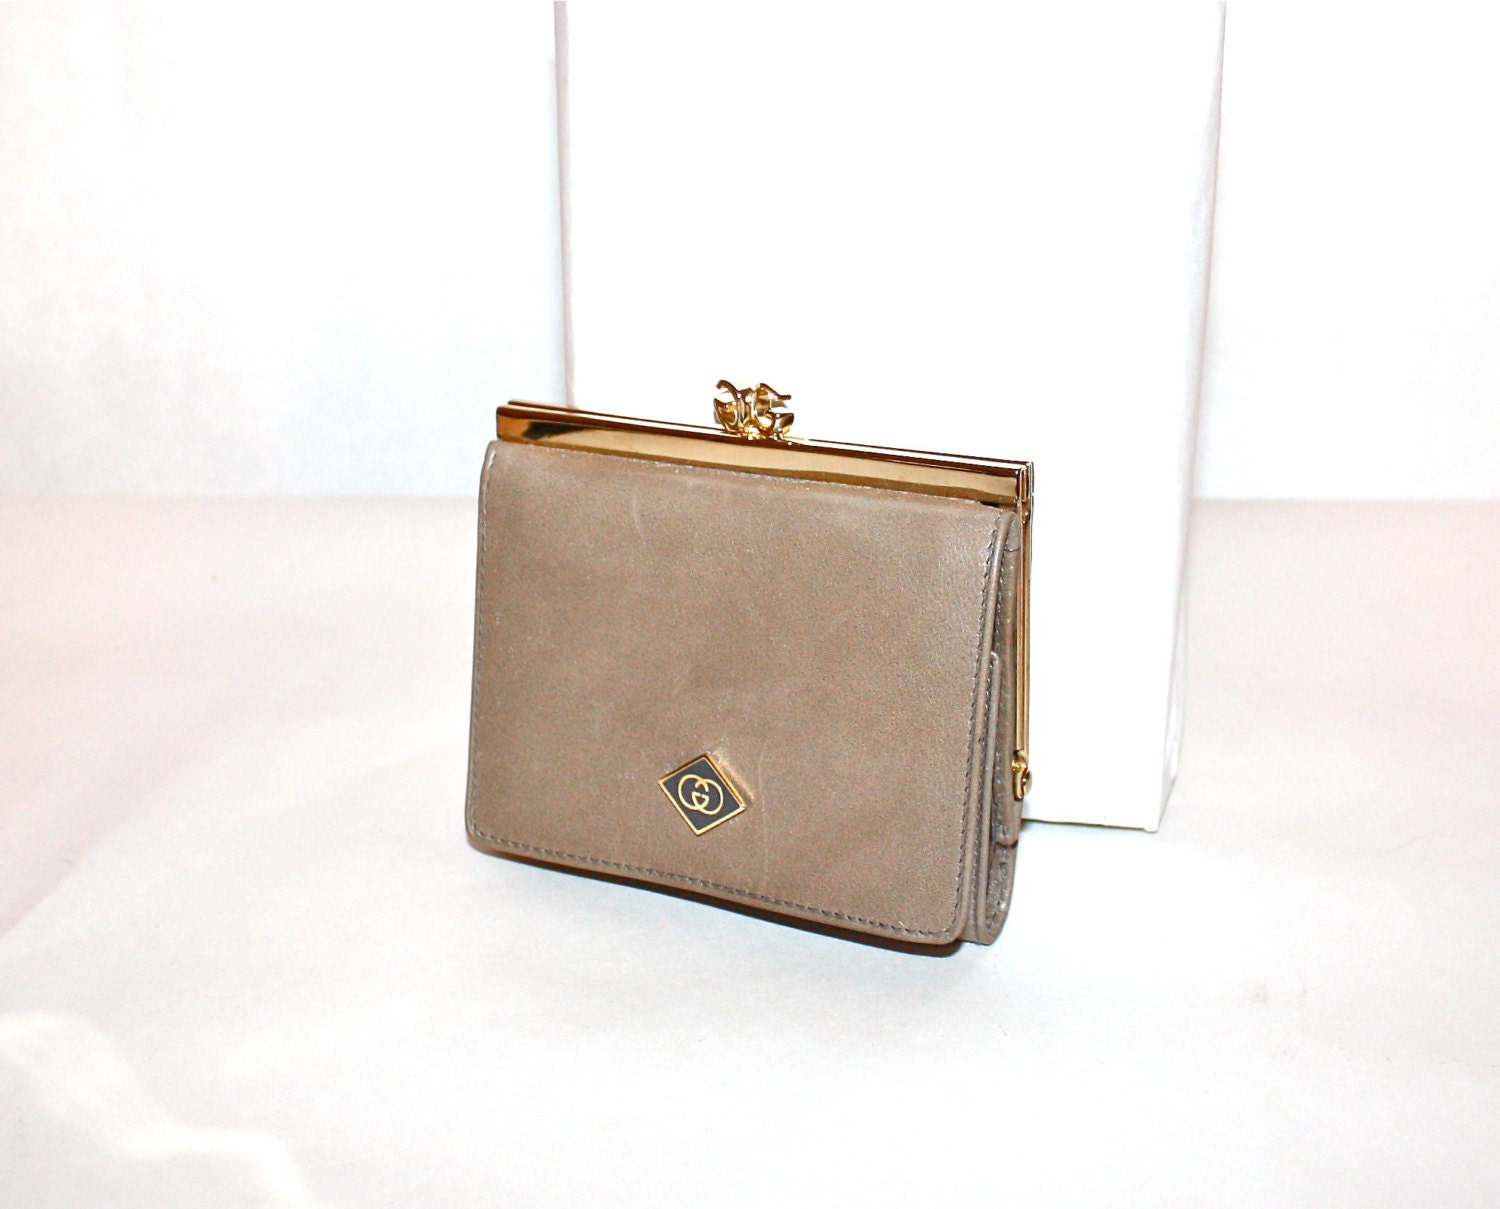 Vintage GUCCI Wallet Taupe Leather Tri-Fold by StatedStyle on Etsy